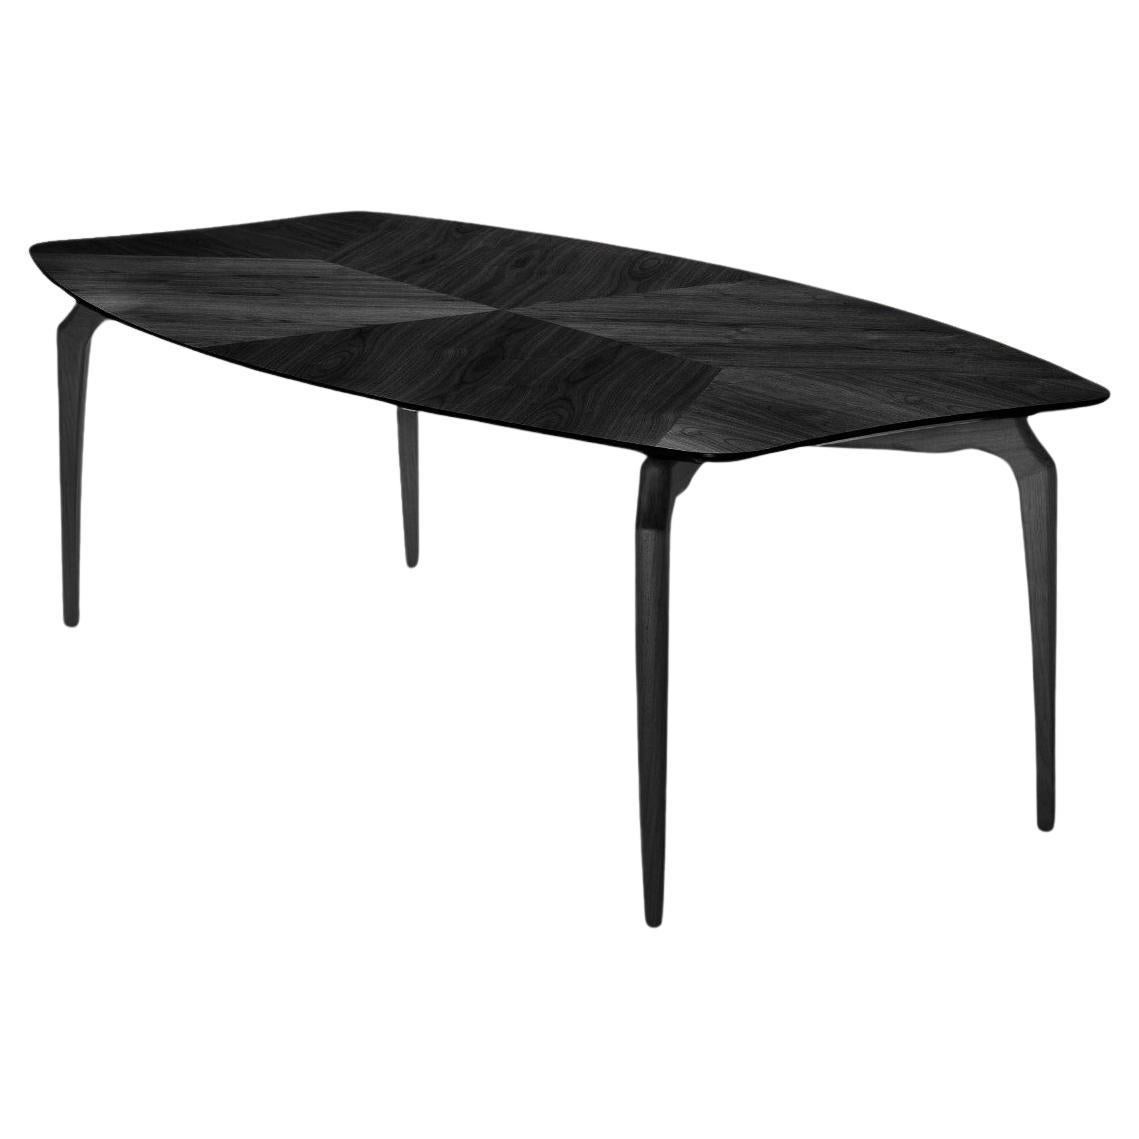 Contemporary "Gaulino" dining table by Oscar Tusquets, black stained ash wood